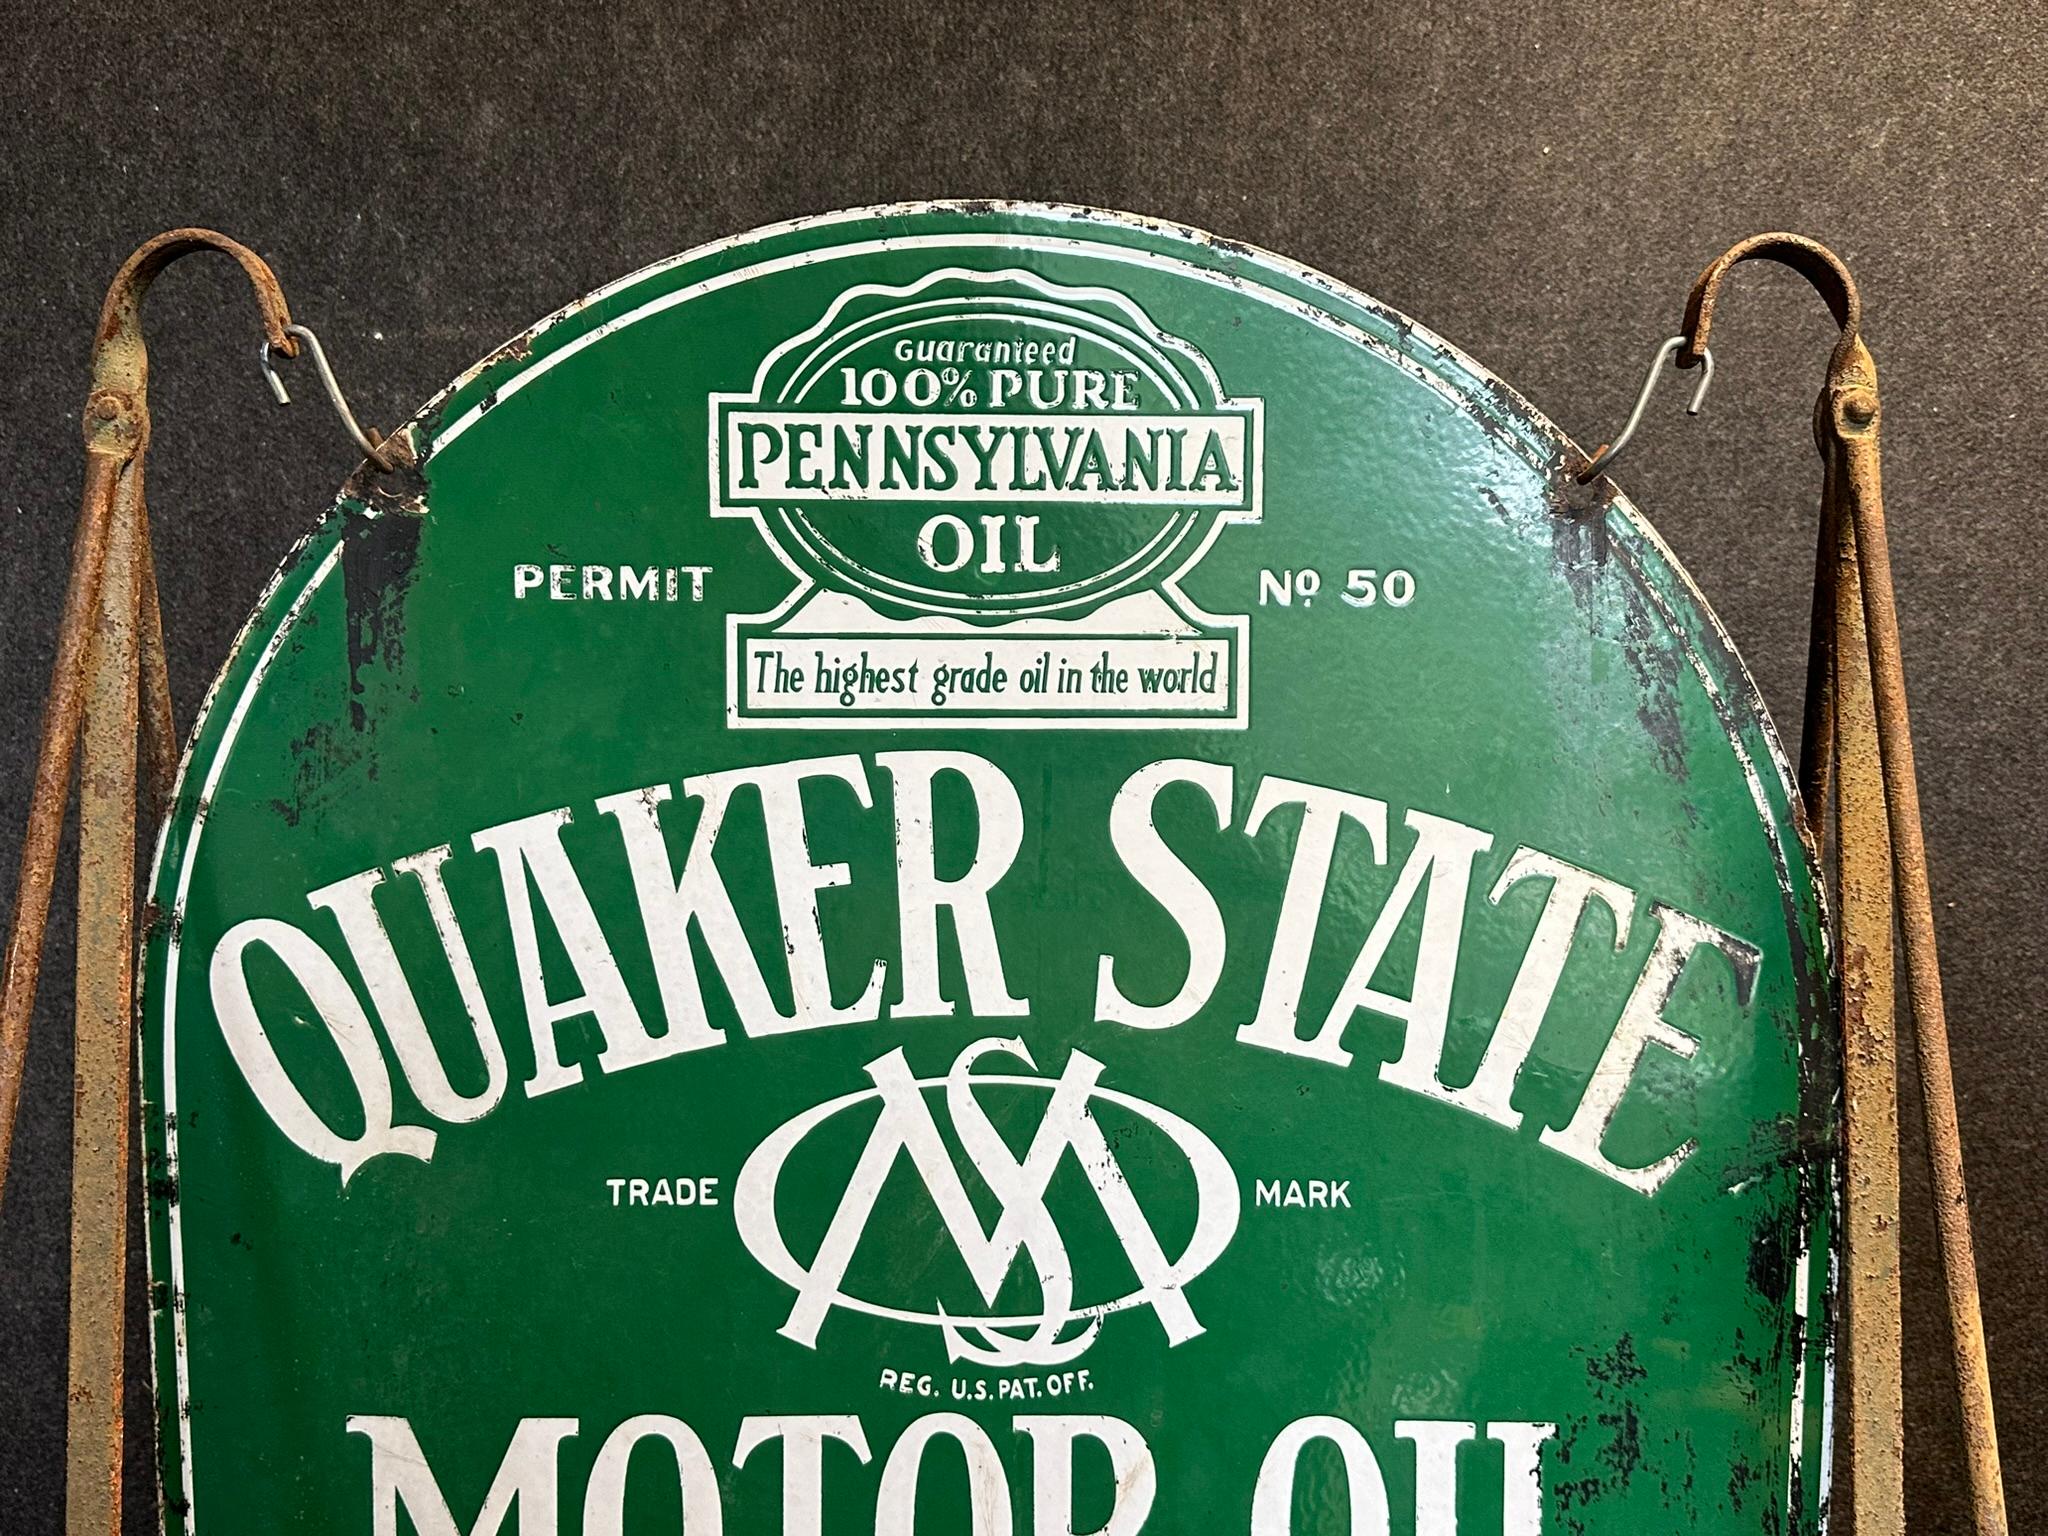 1930s Quaker State Motor Oil Curbside Double Sided Porcelain Advertising Sign w/ Original Frame